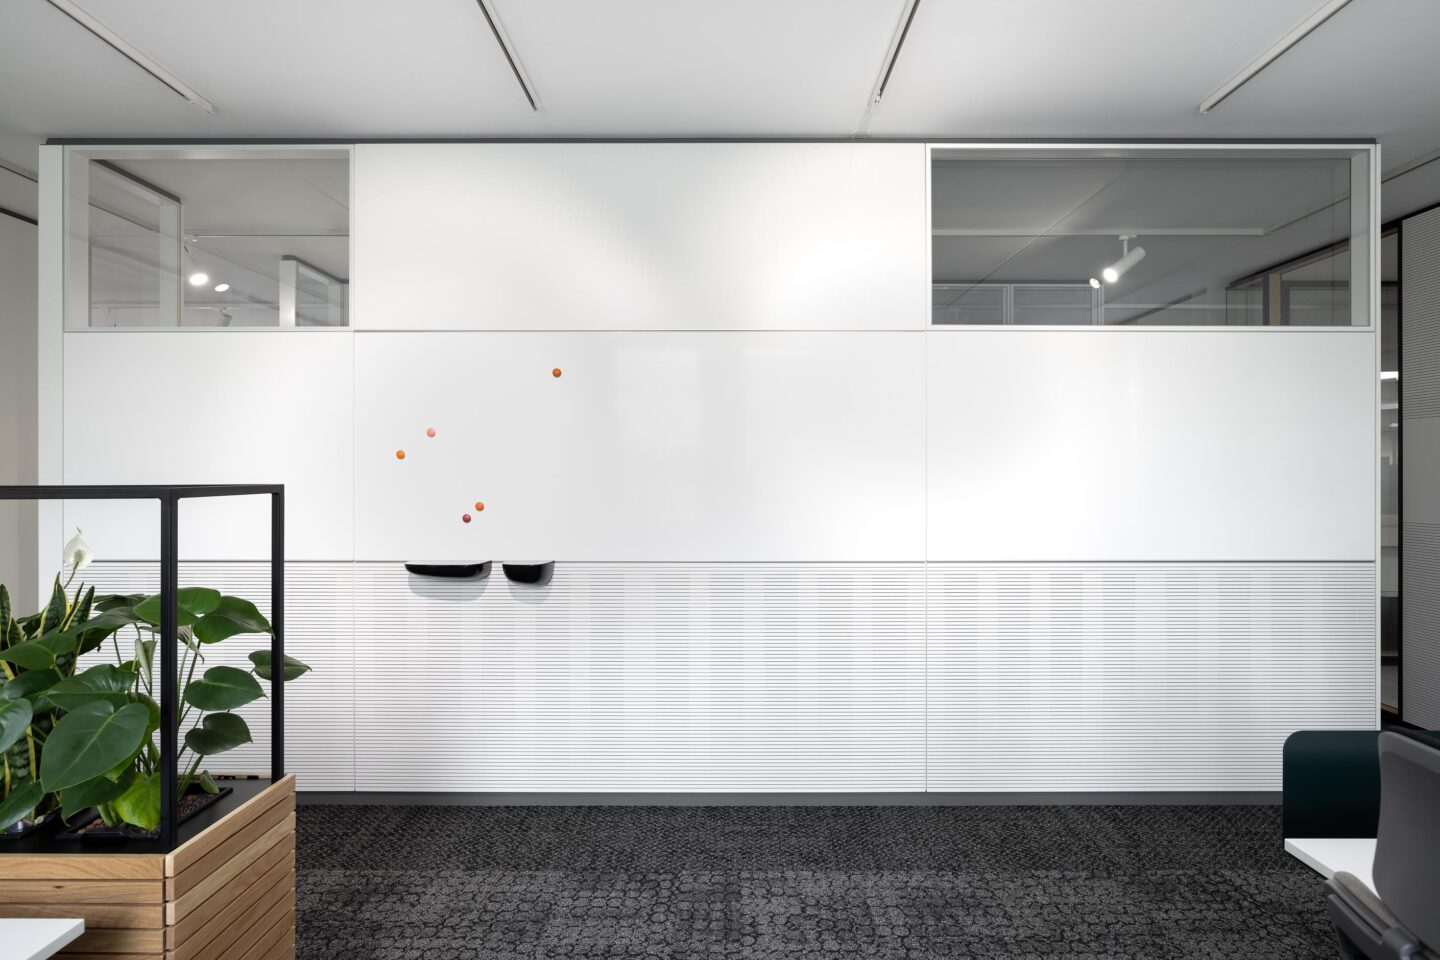 writable walls by feco │ Whiteboard integrated in the partition wall │ magnetic walls